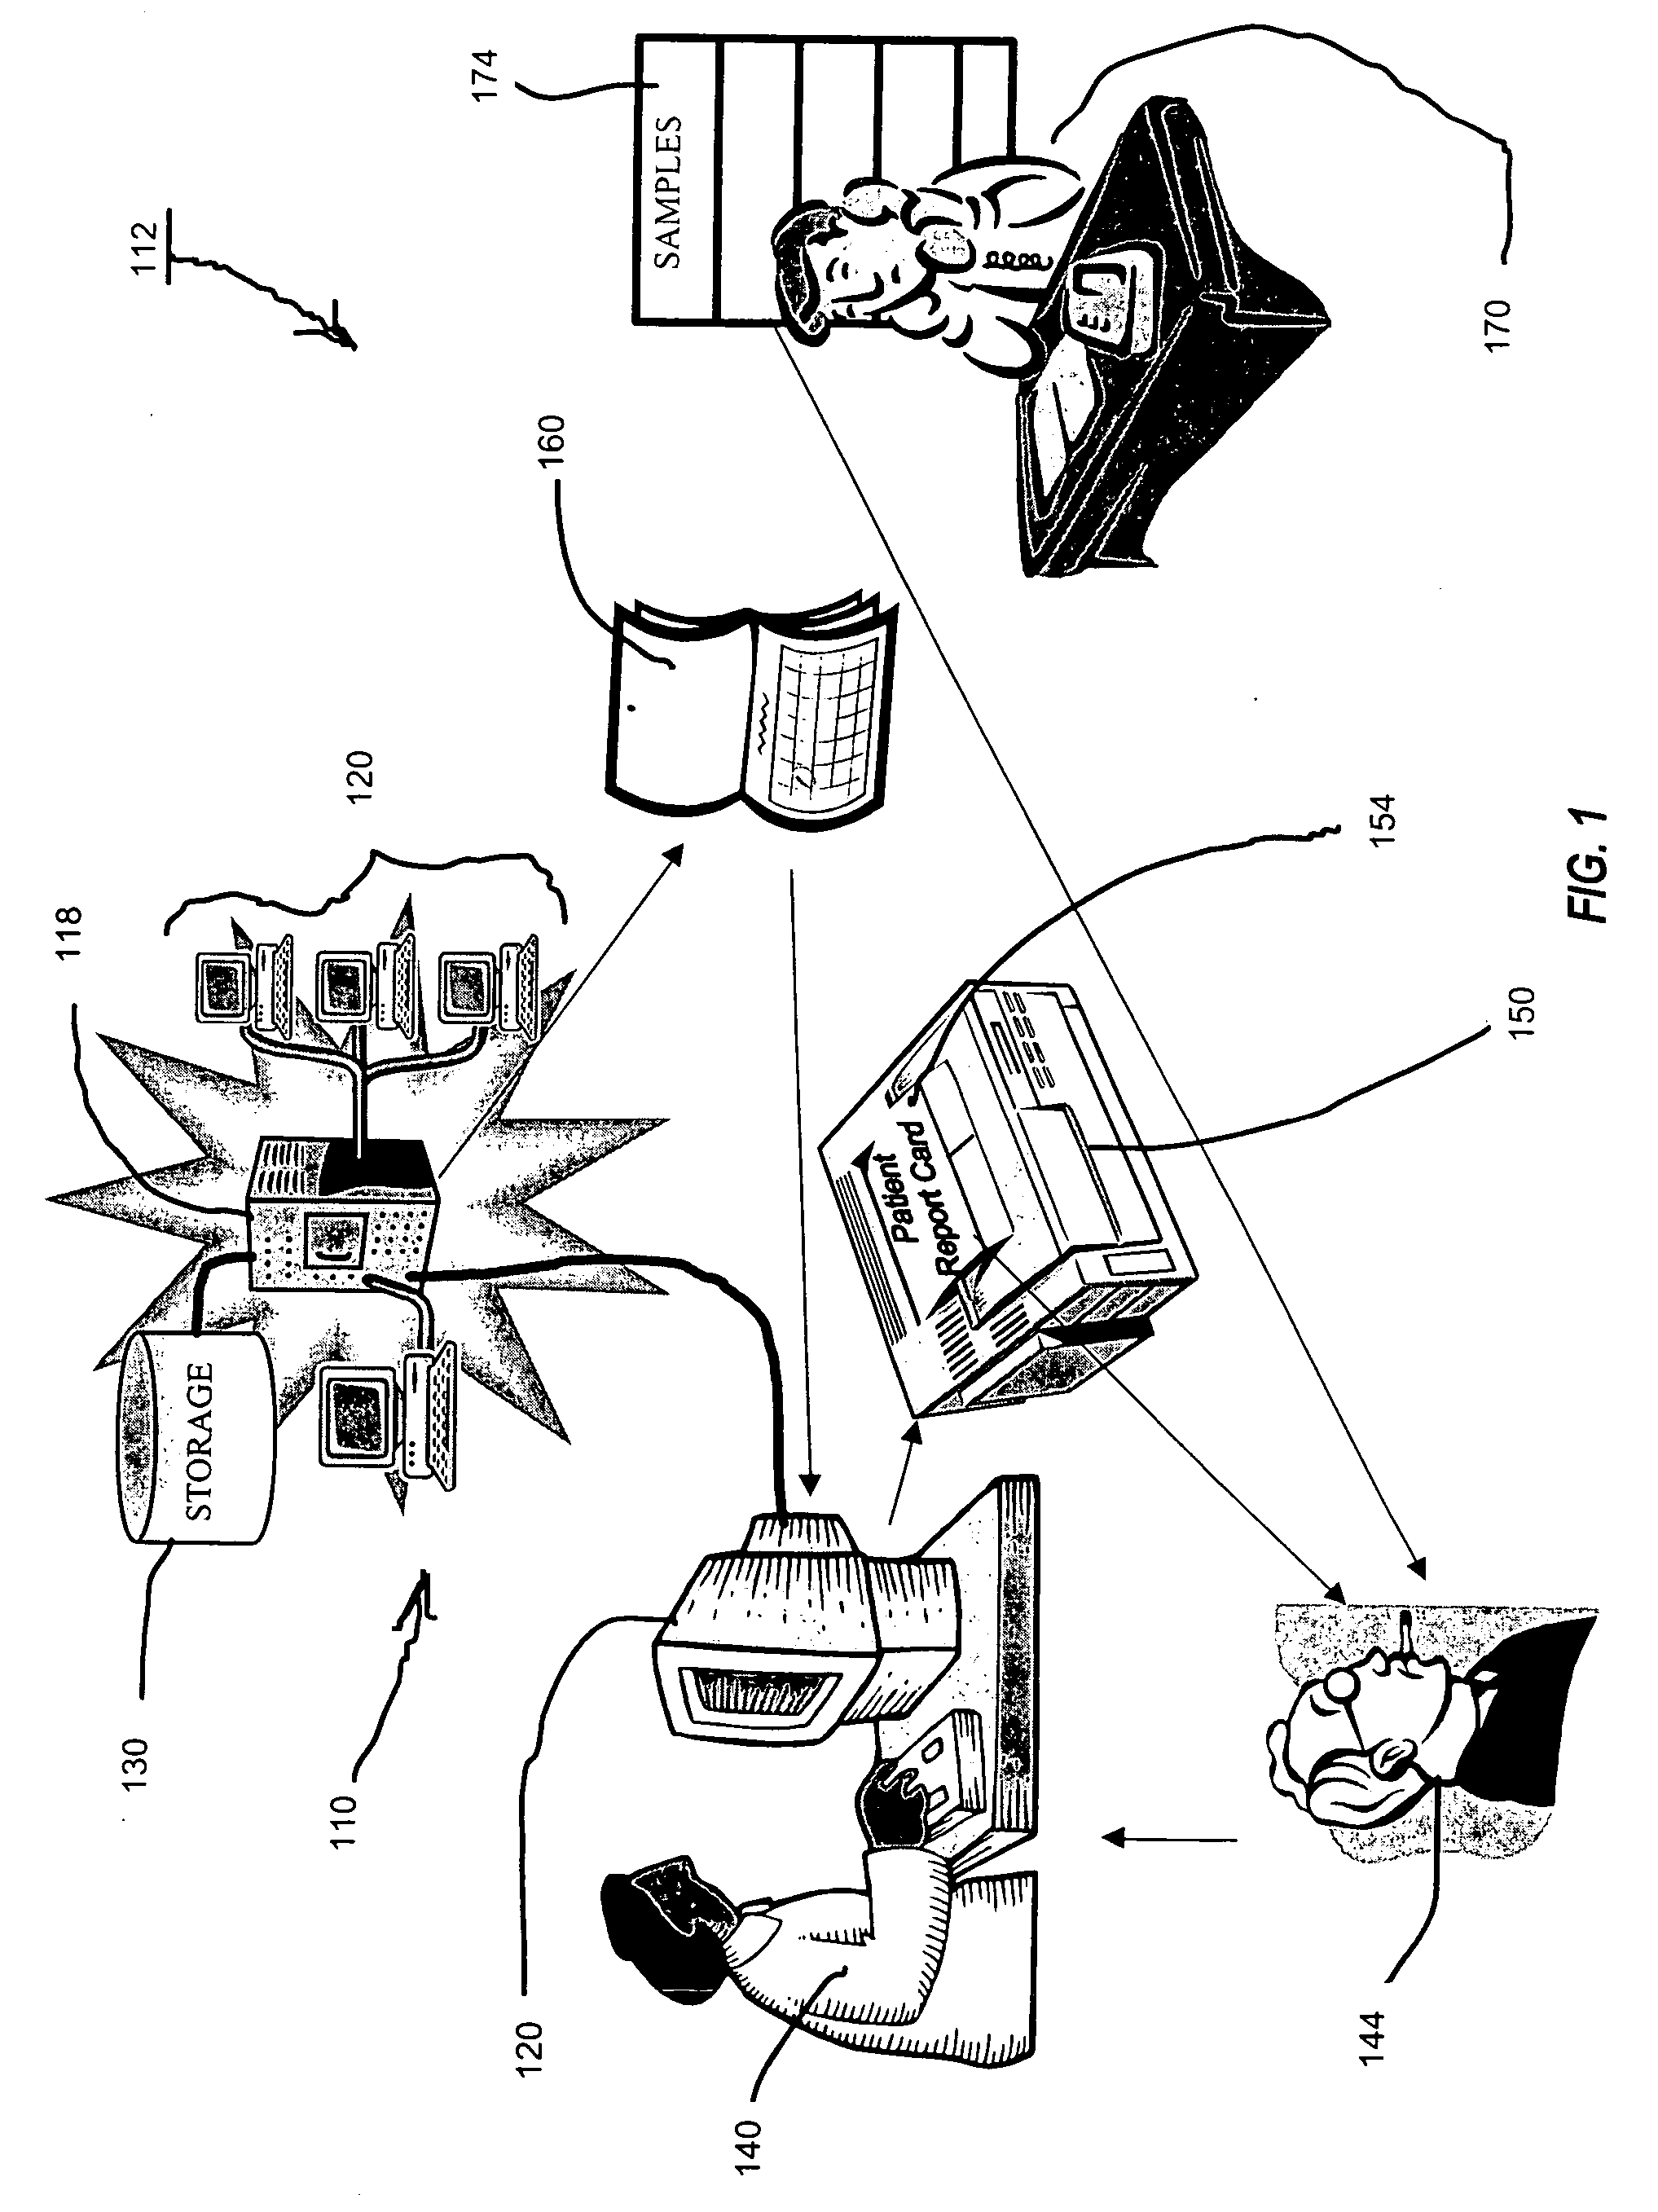 System and method for managing diseases according to standard protocols and linking patients to medication samples and related benefits